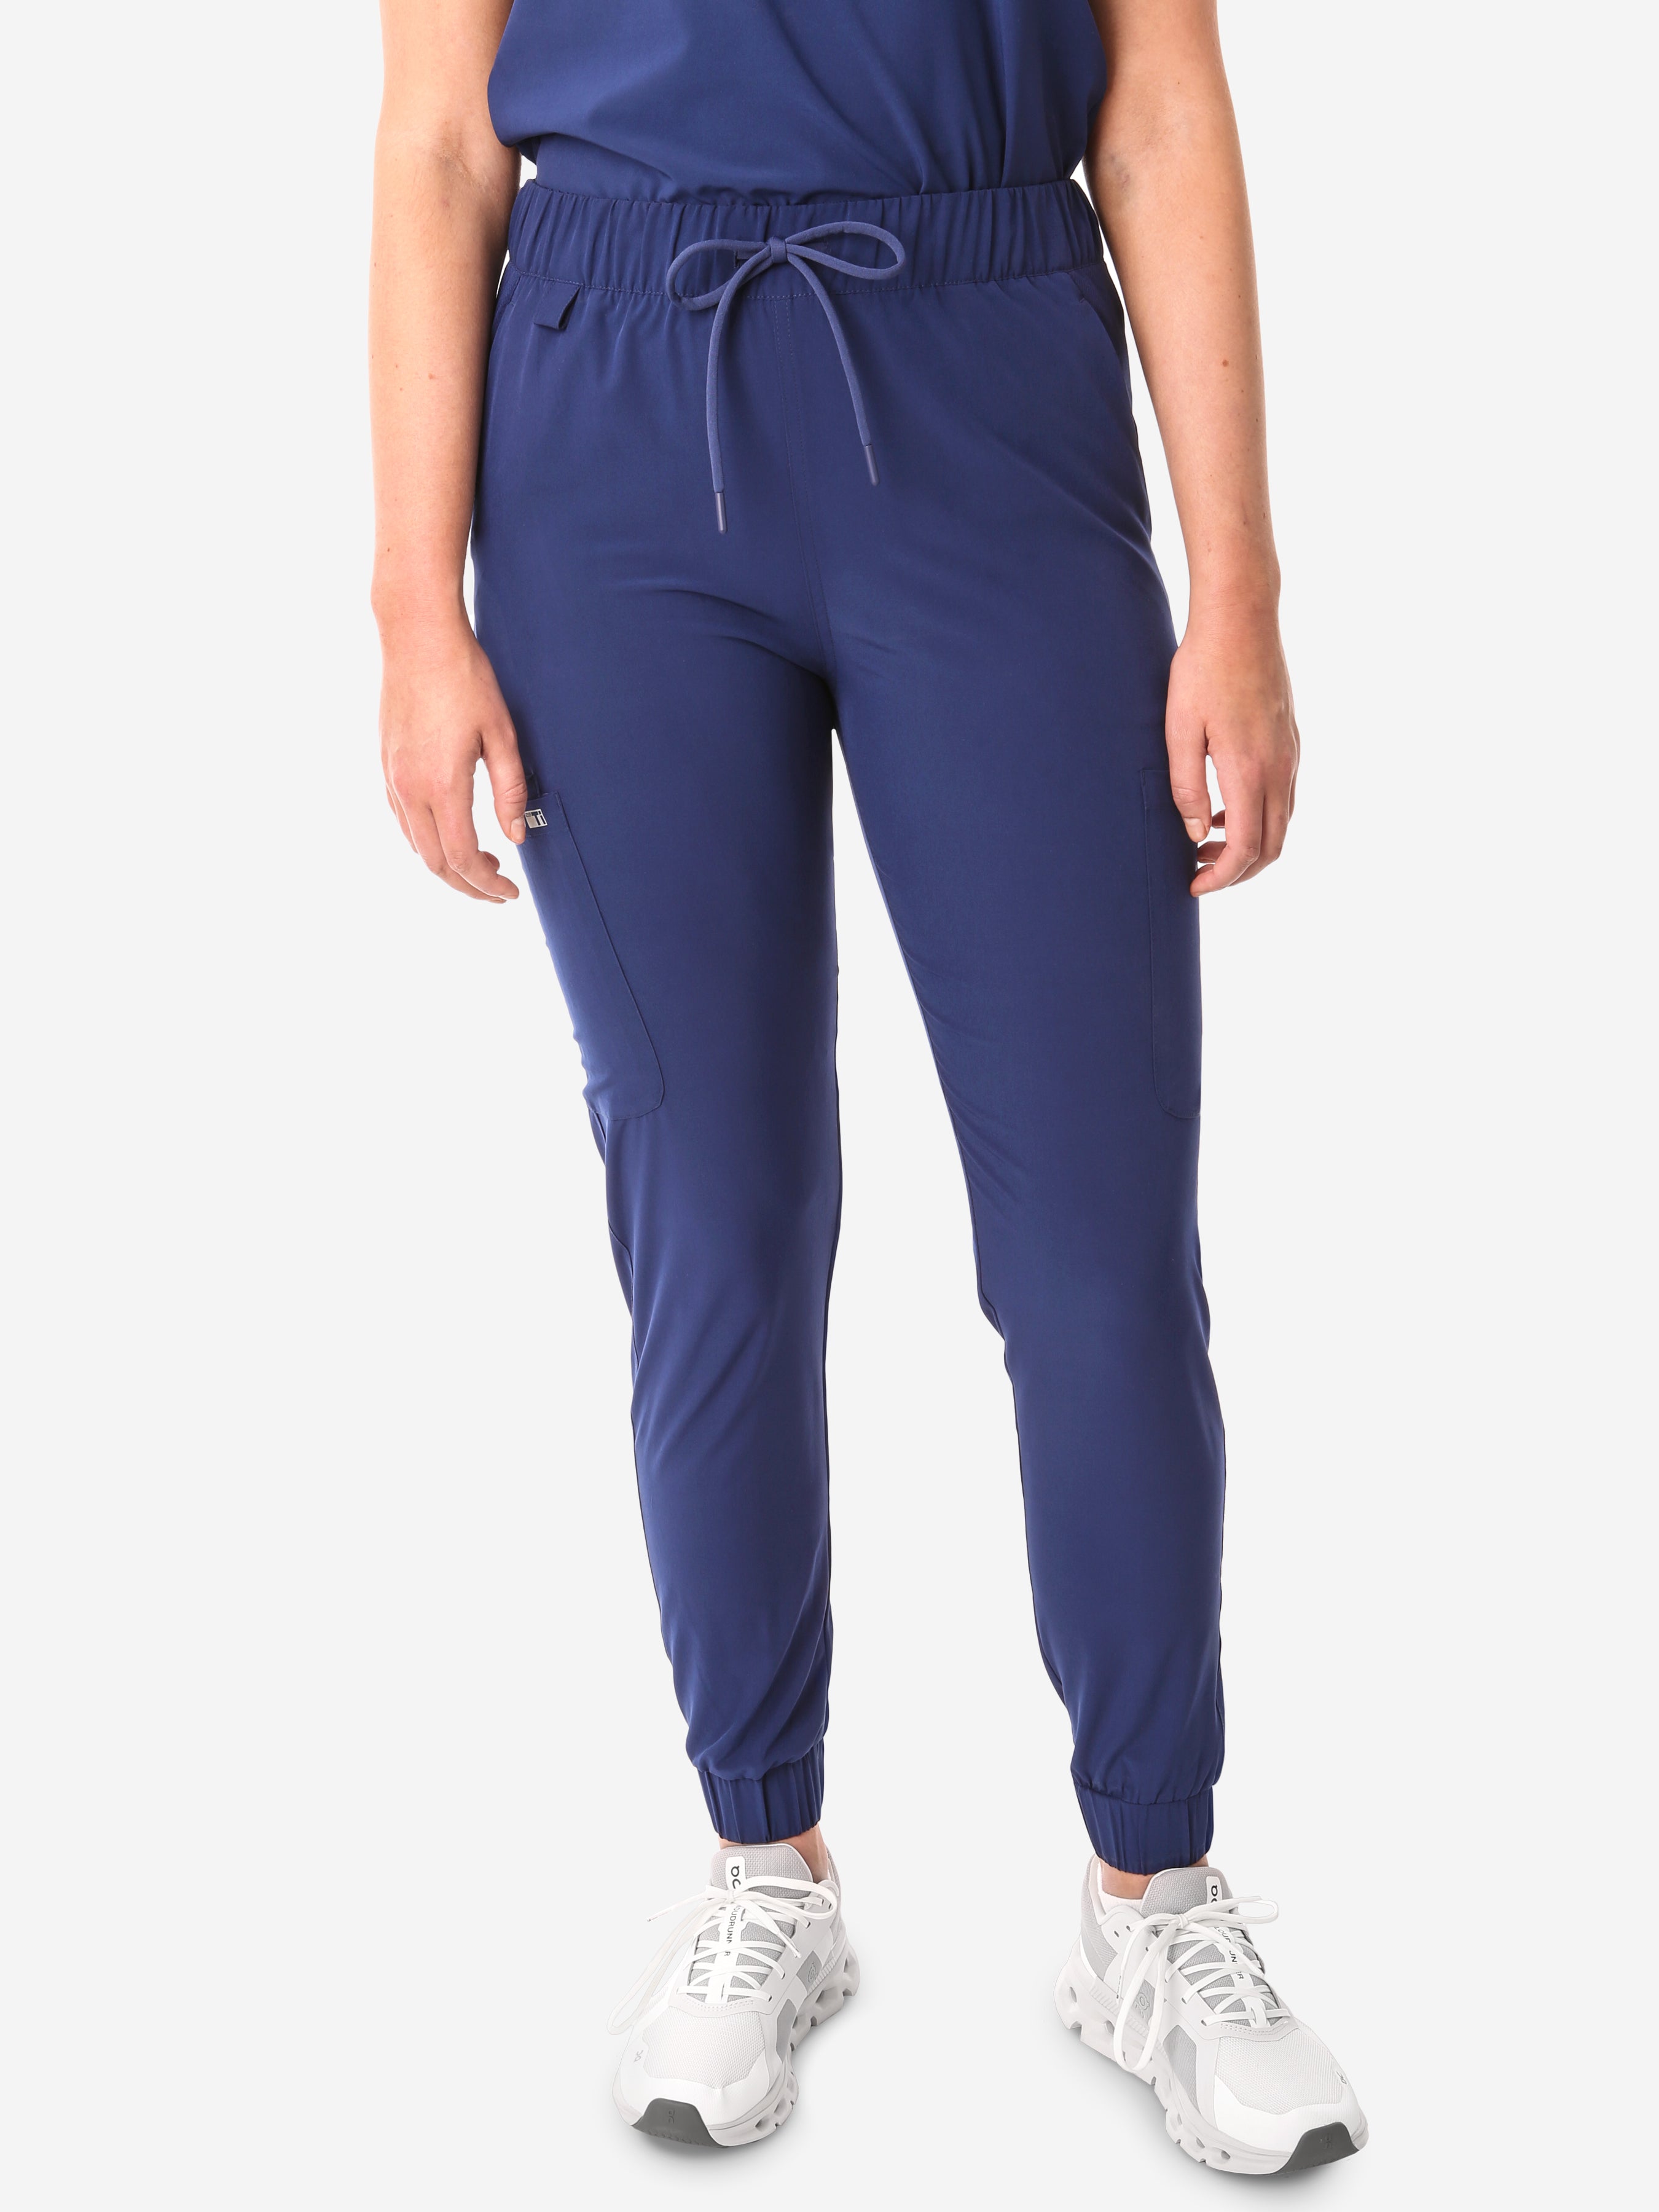 TiScrubs Navy Blue Women's Stretch Perfect Jogger Pants Front View Pants Only